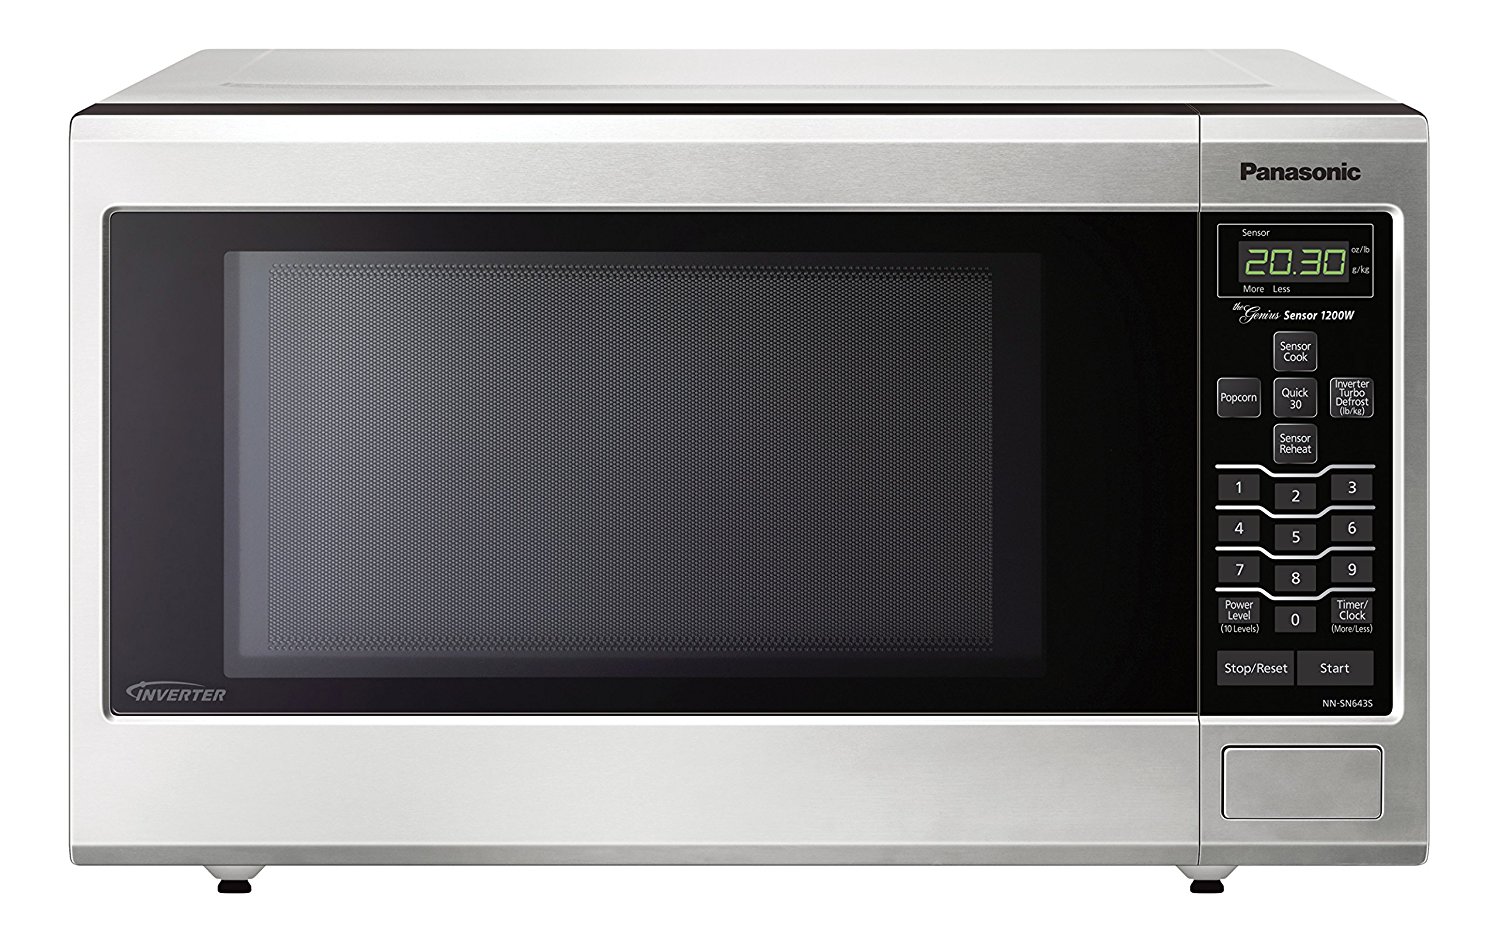 Panasonic NN-SN643SAZ Stainless 1.2 Cu. Ft. Countertop/Built-In Microwave Oven with Inverter Technology